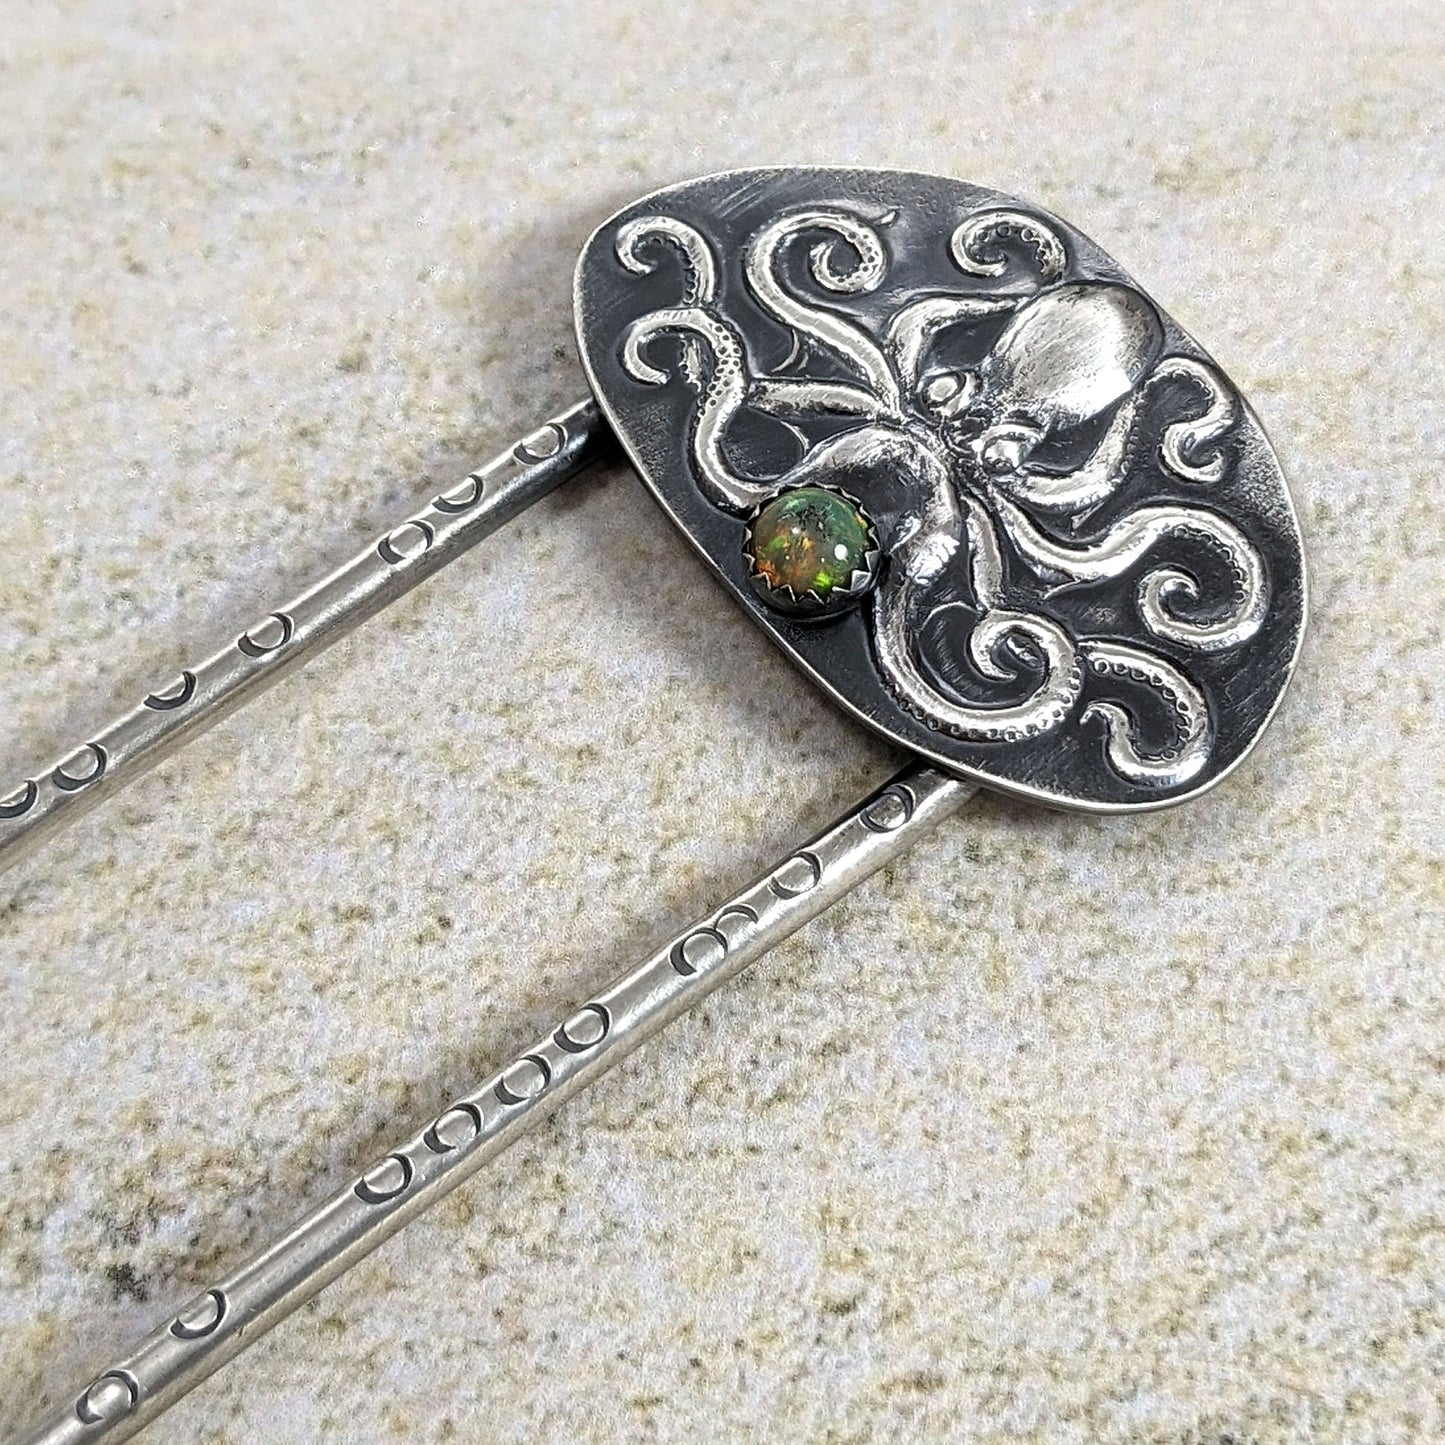 Octopus sterling silver hair fork. The octopus is a detailed raised design on a sterling silver sheet. There is a flashy 5mm opal below the octopus. The fork has stamped circles to represent octopus suckers.  fork and octopus design are blackened to show the details. The entire piece is handmade sterling silver.